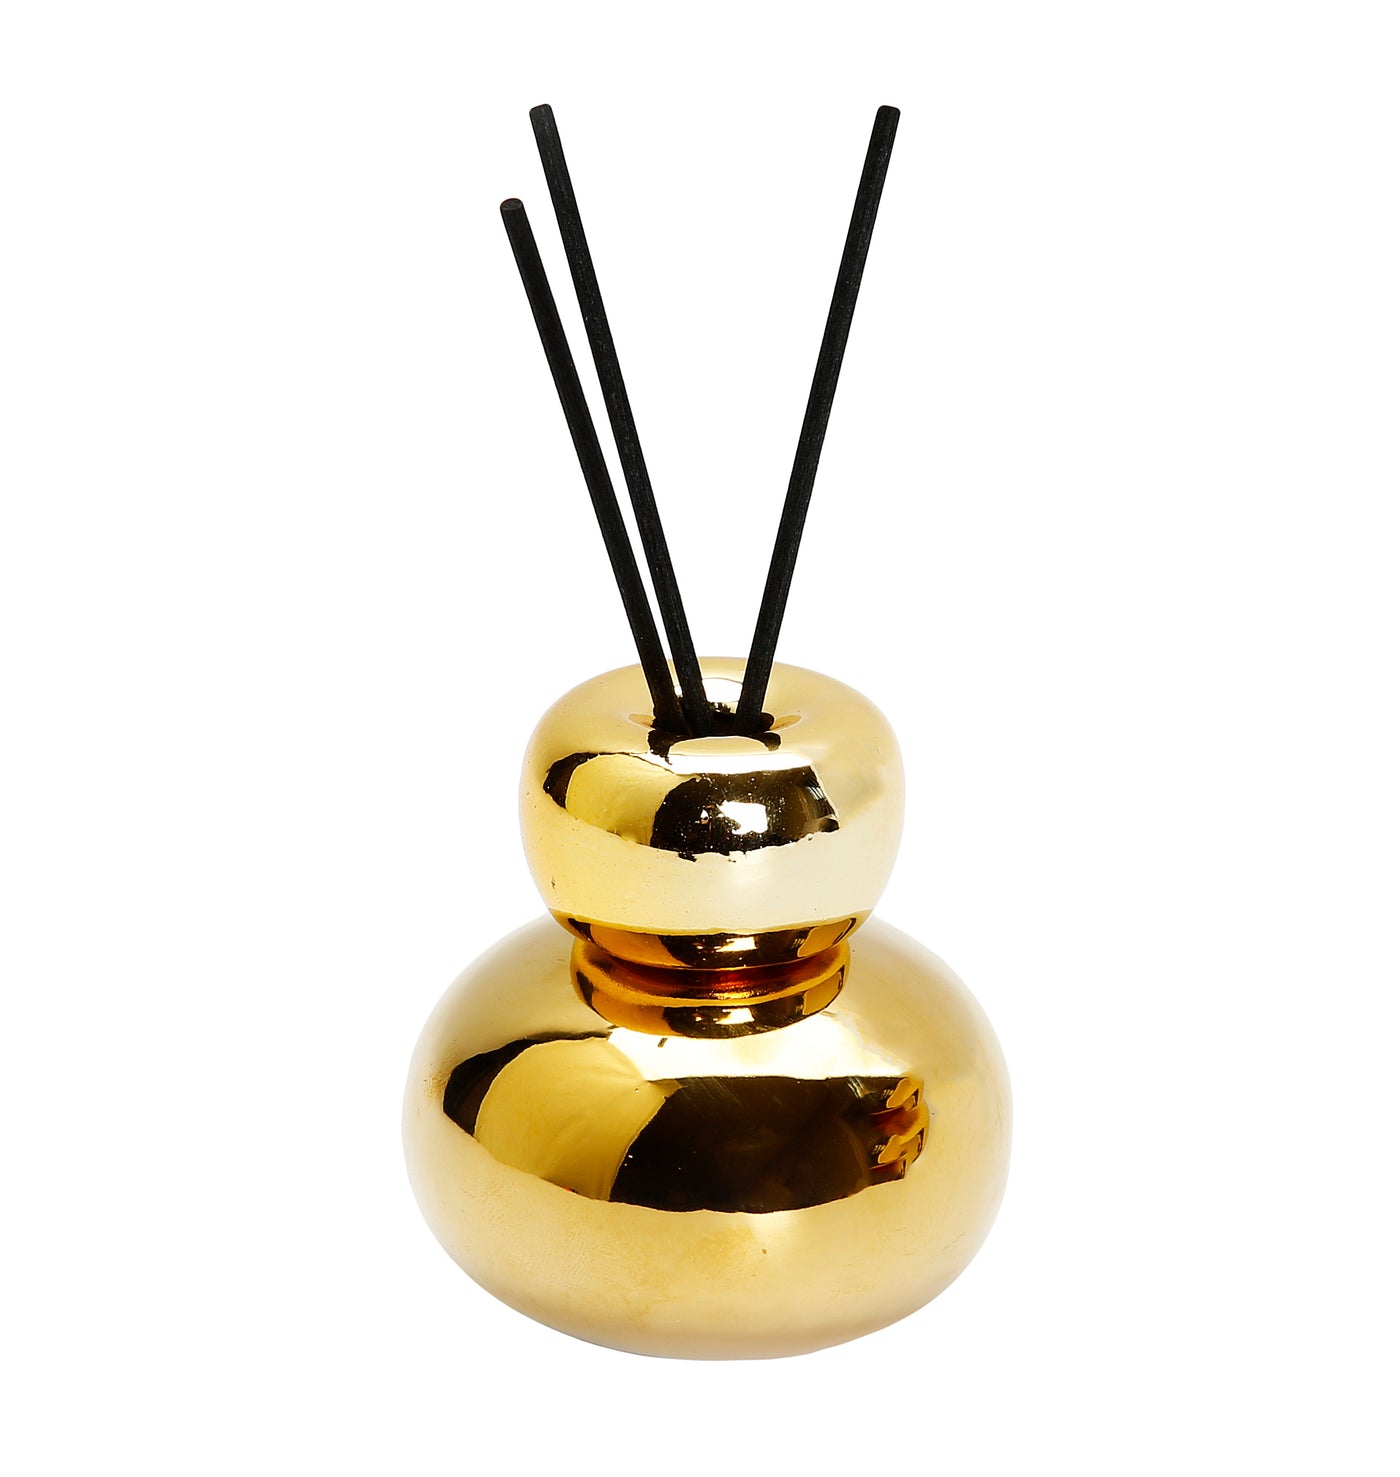 Gold Round Reed Diffuser, "Lily of The Valley" Scent